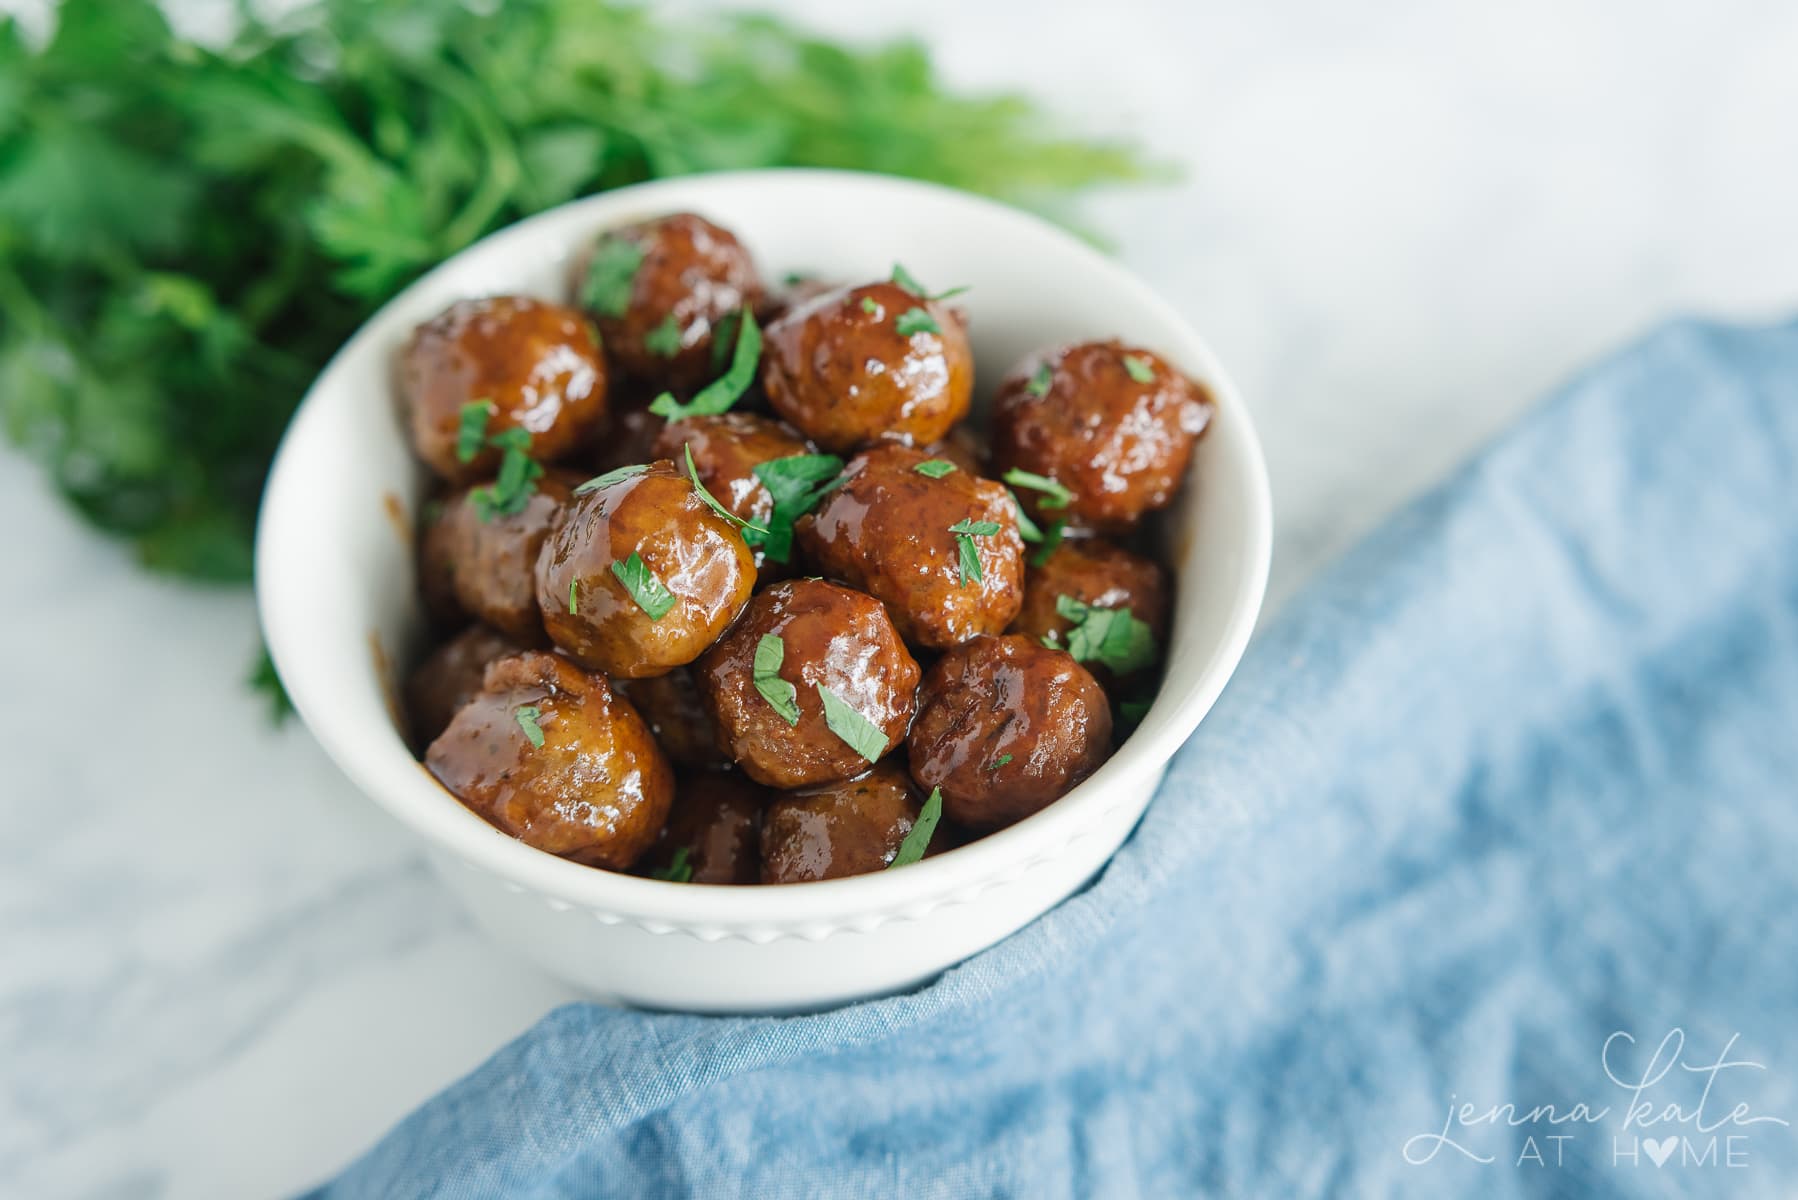 Honey BBQ meatballs pair well with a red blend wine